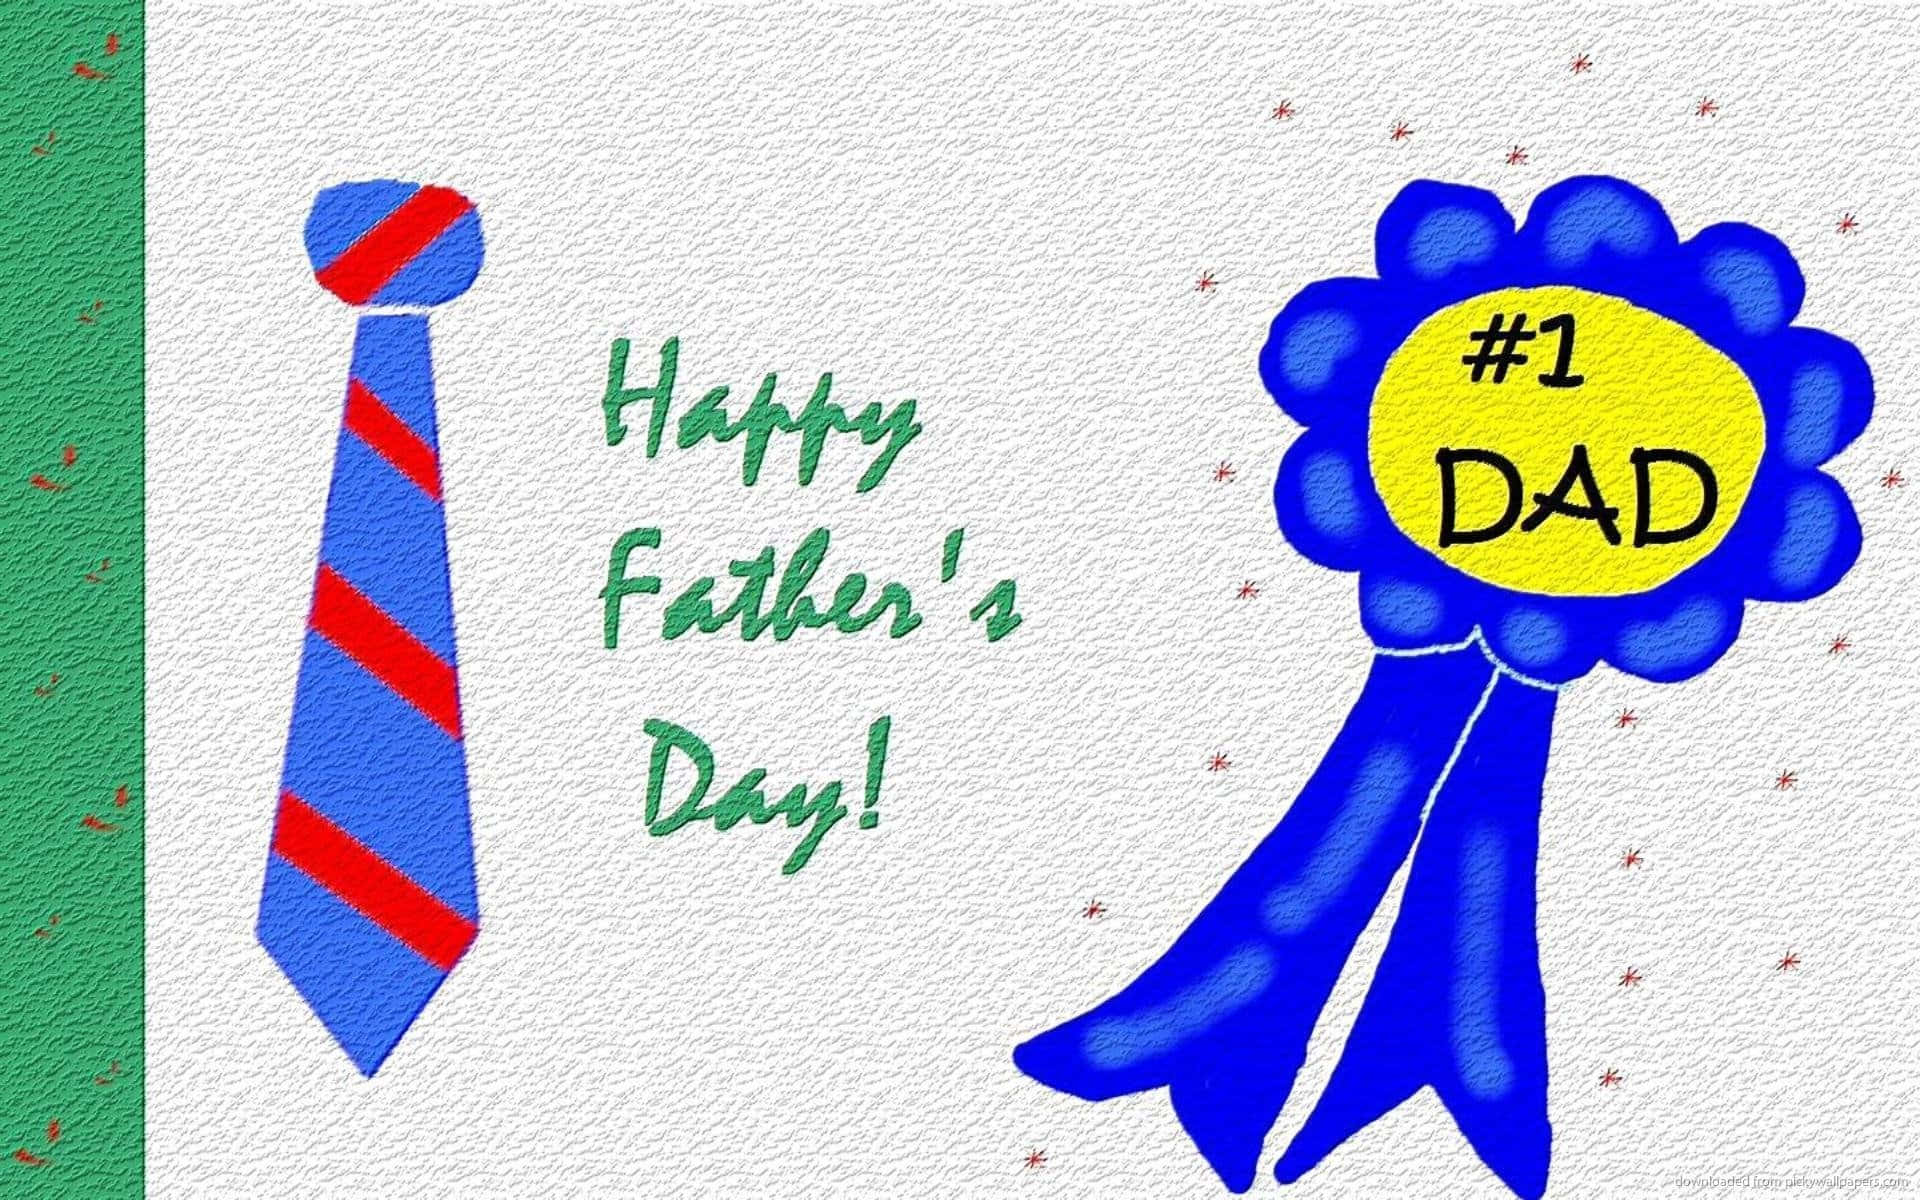 Celebrate the special bond between father and child this Father's Day!